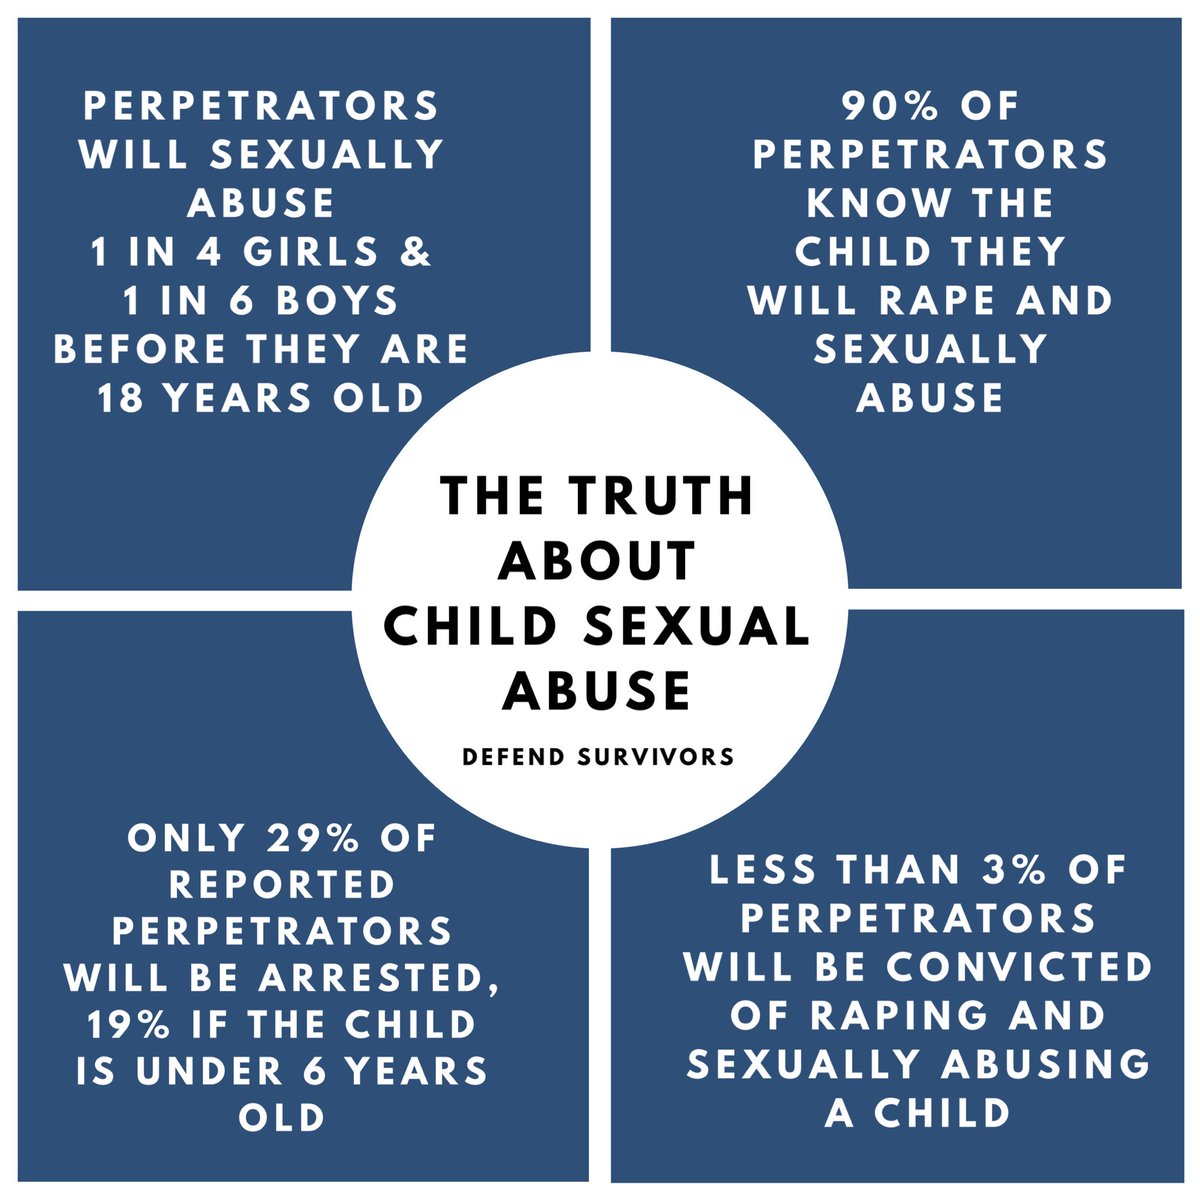 Know the facts - and don’t leave the perpetrator out of the facts. 

#childabuseawarenessmonth #CAAM #CAPM #SAAM #SAAPM #childabusepreventionmonth